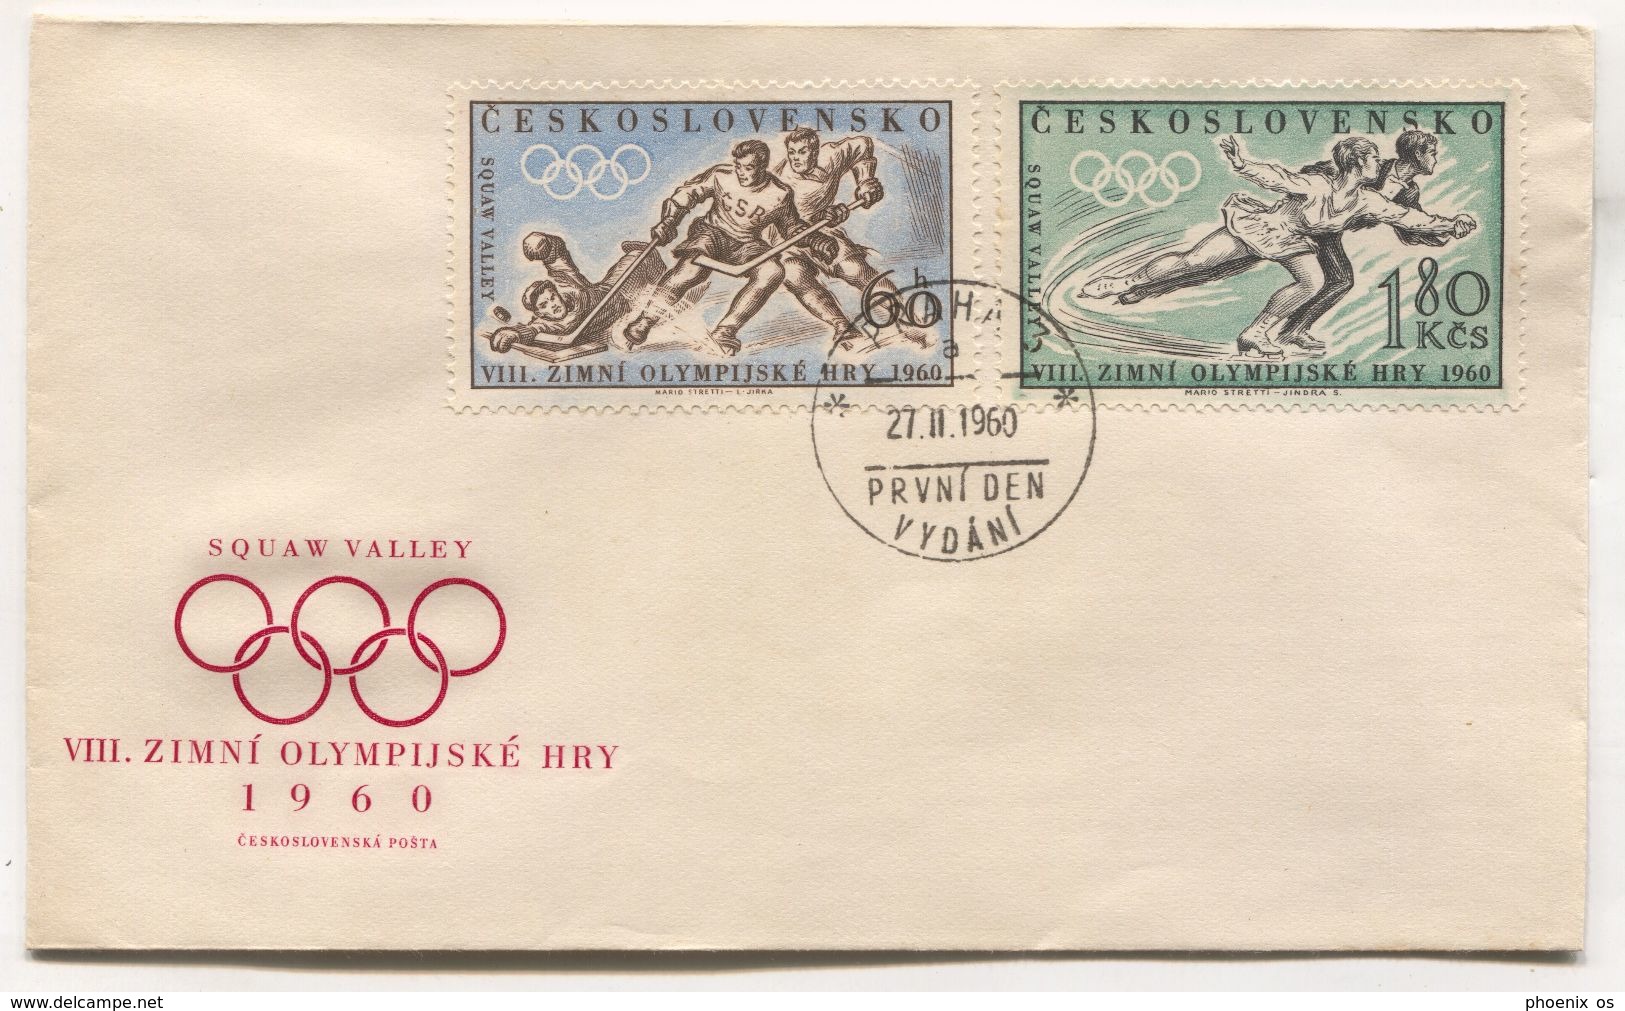 WINTER OLYMPICS / OLYMPIAD, SQUAW VALLEY 1960. CALIFORNIA USA, FDC COVER CZECHOSLOVAK - Hiver 1960: Squaw Valley